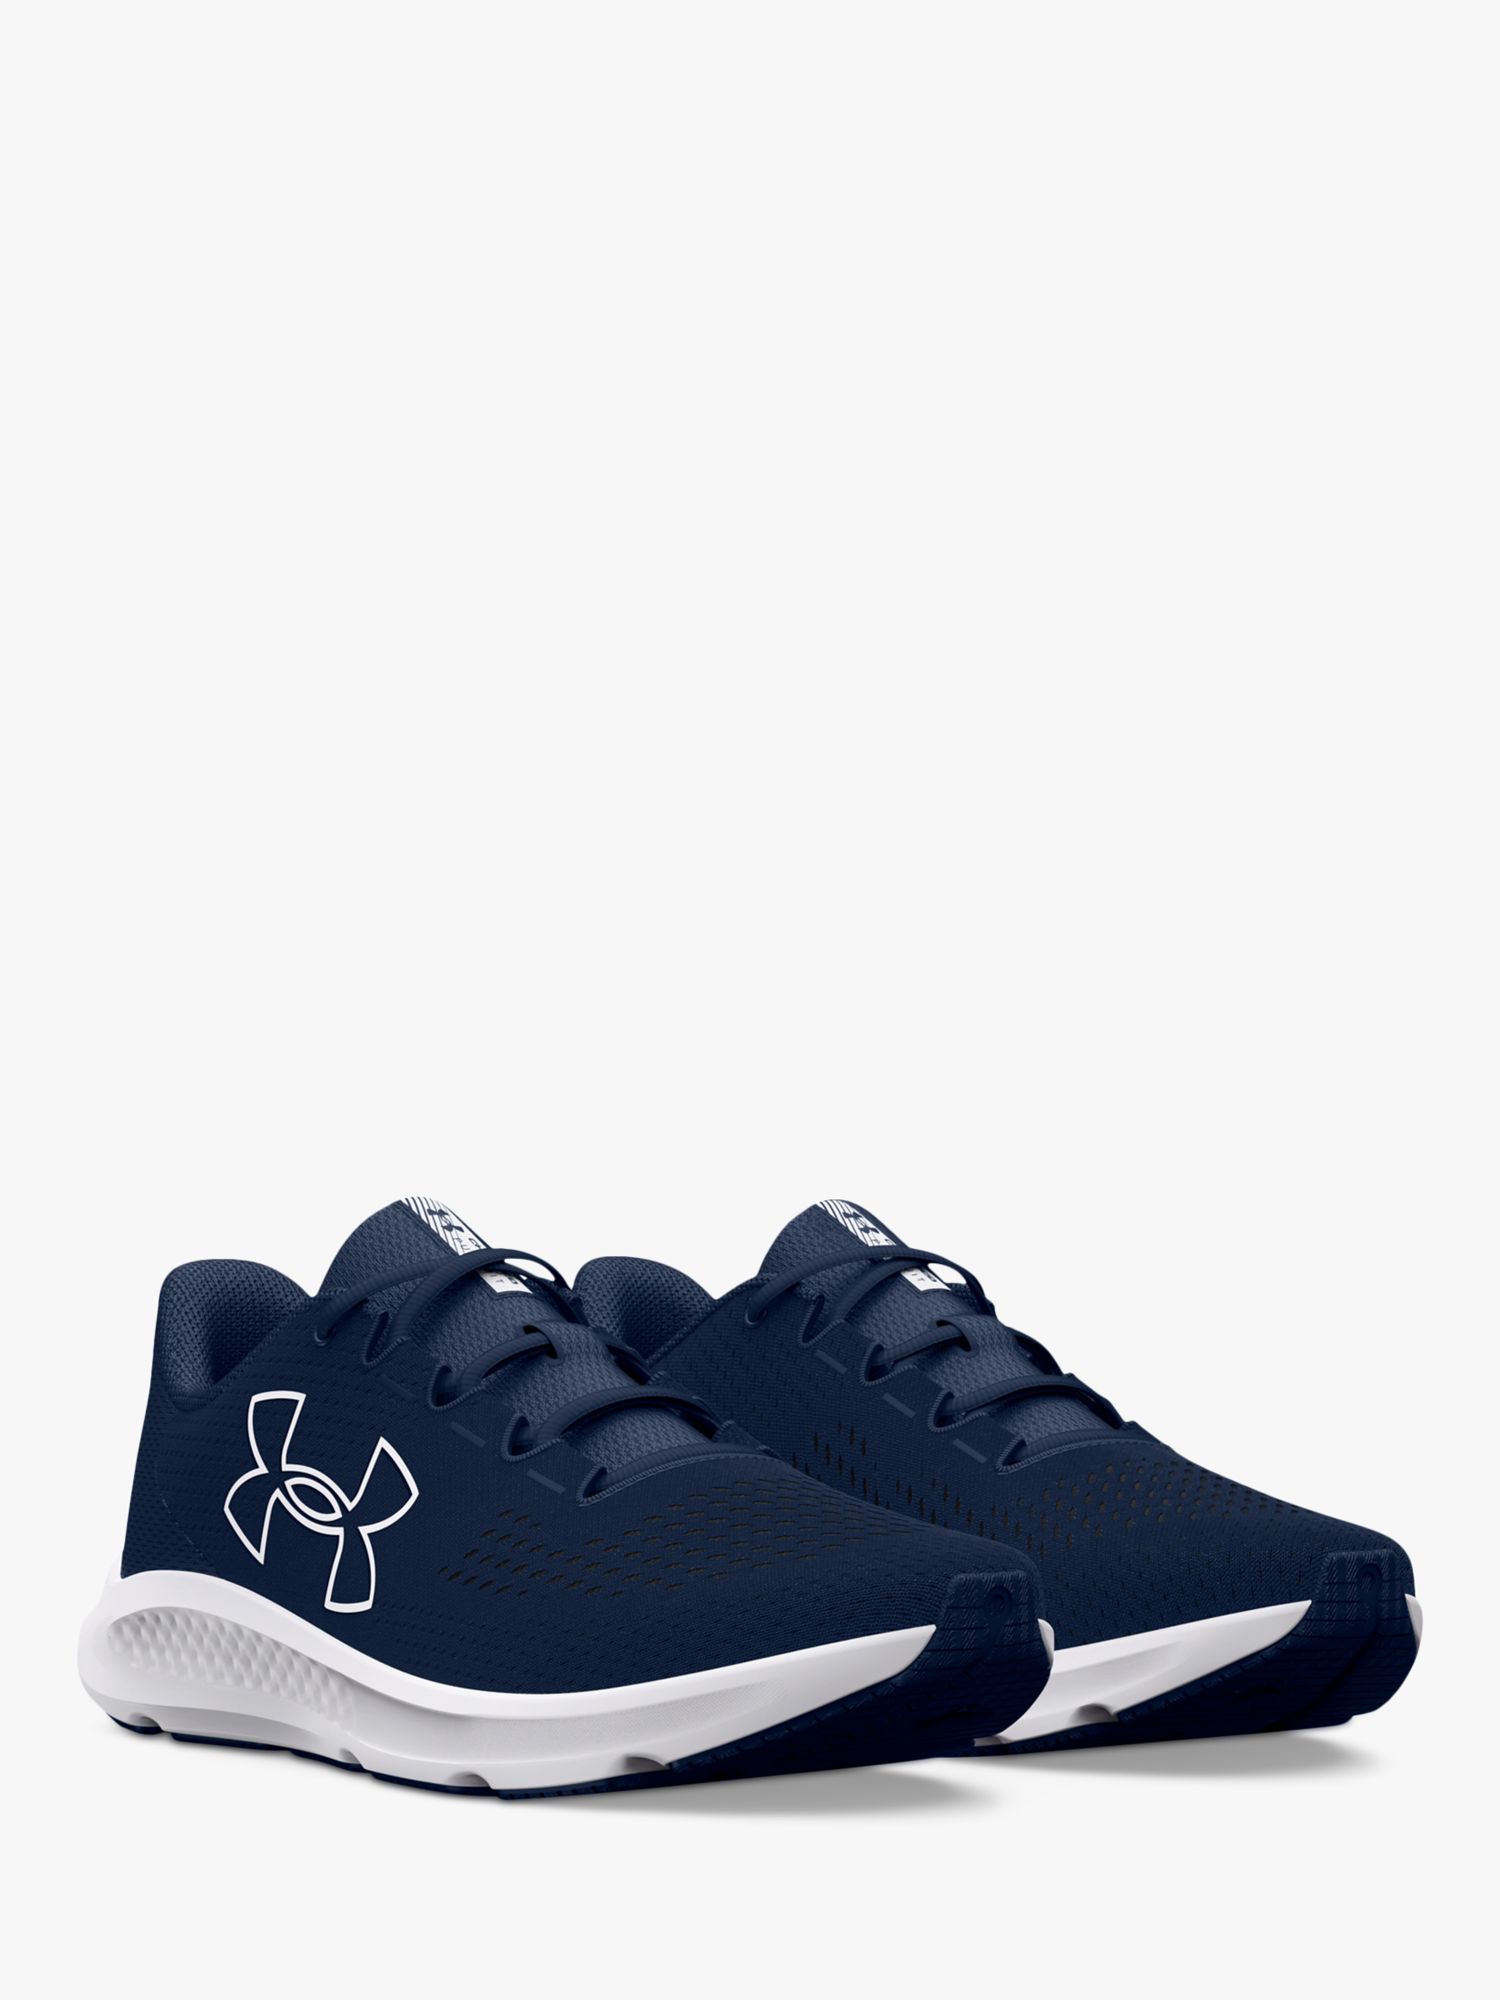 Buy Under Armour Charged Pursuit 3 Big Logo Men's Running Shoes Online at johnlewis.com